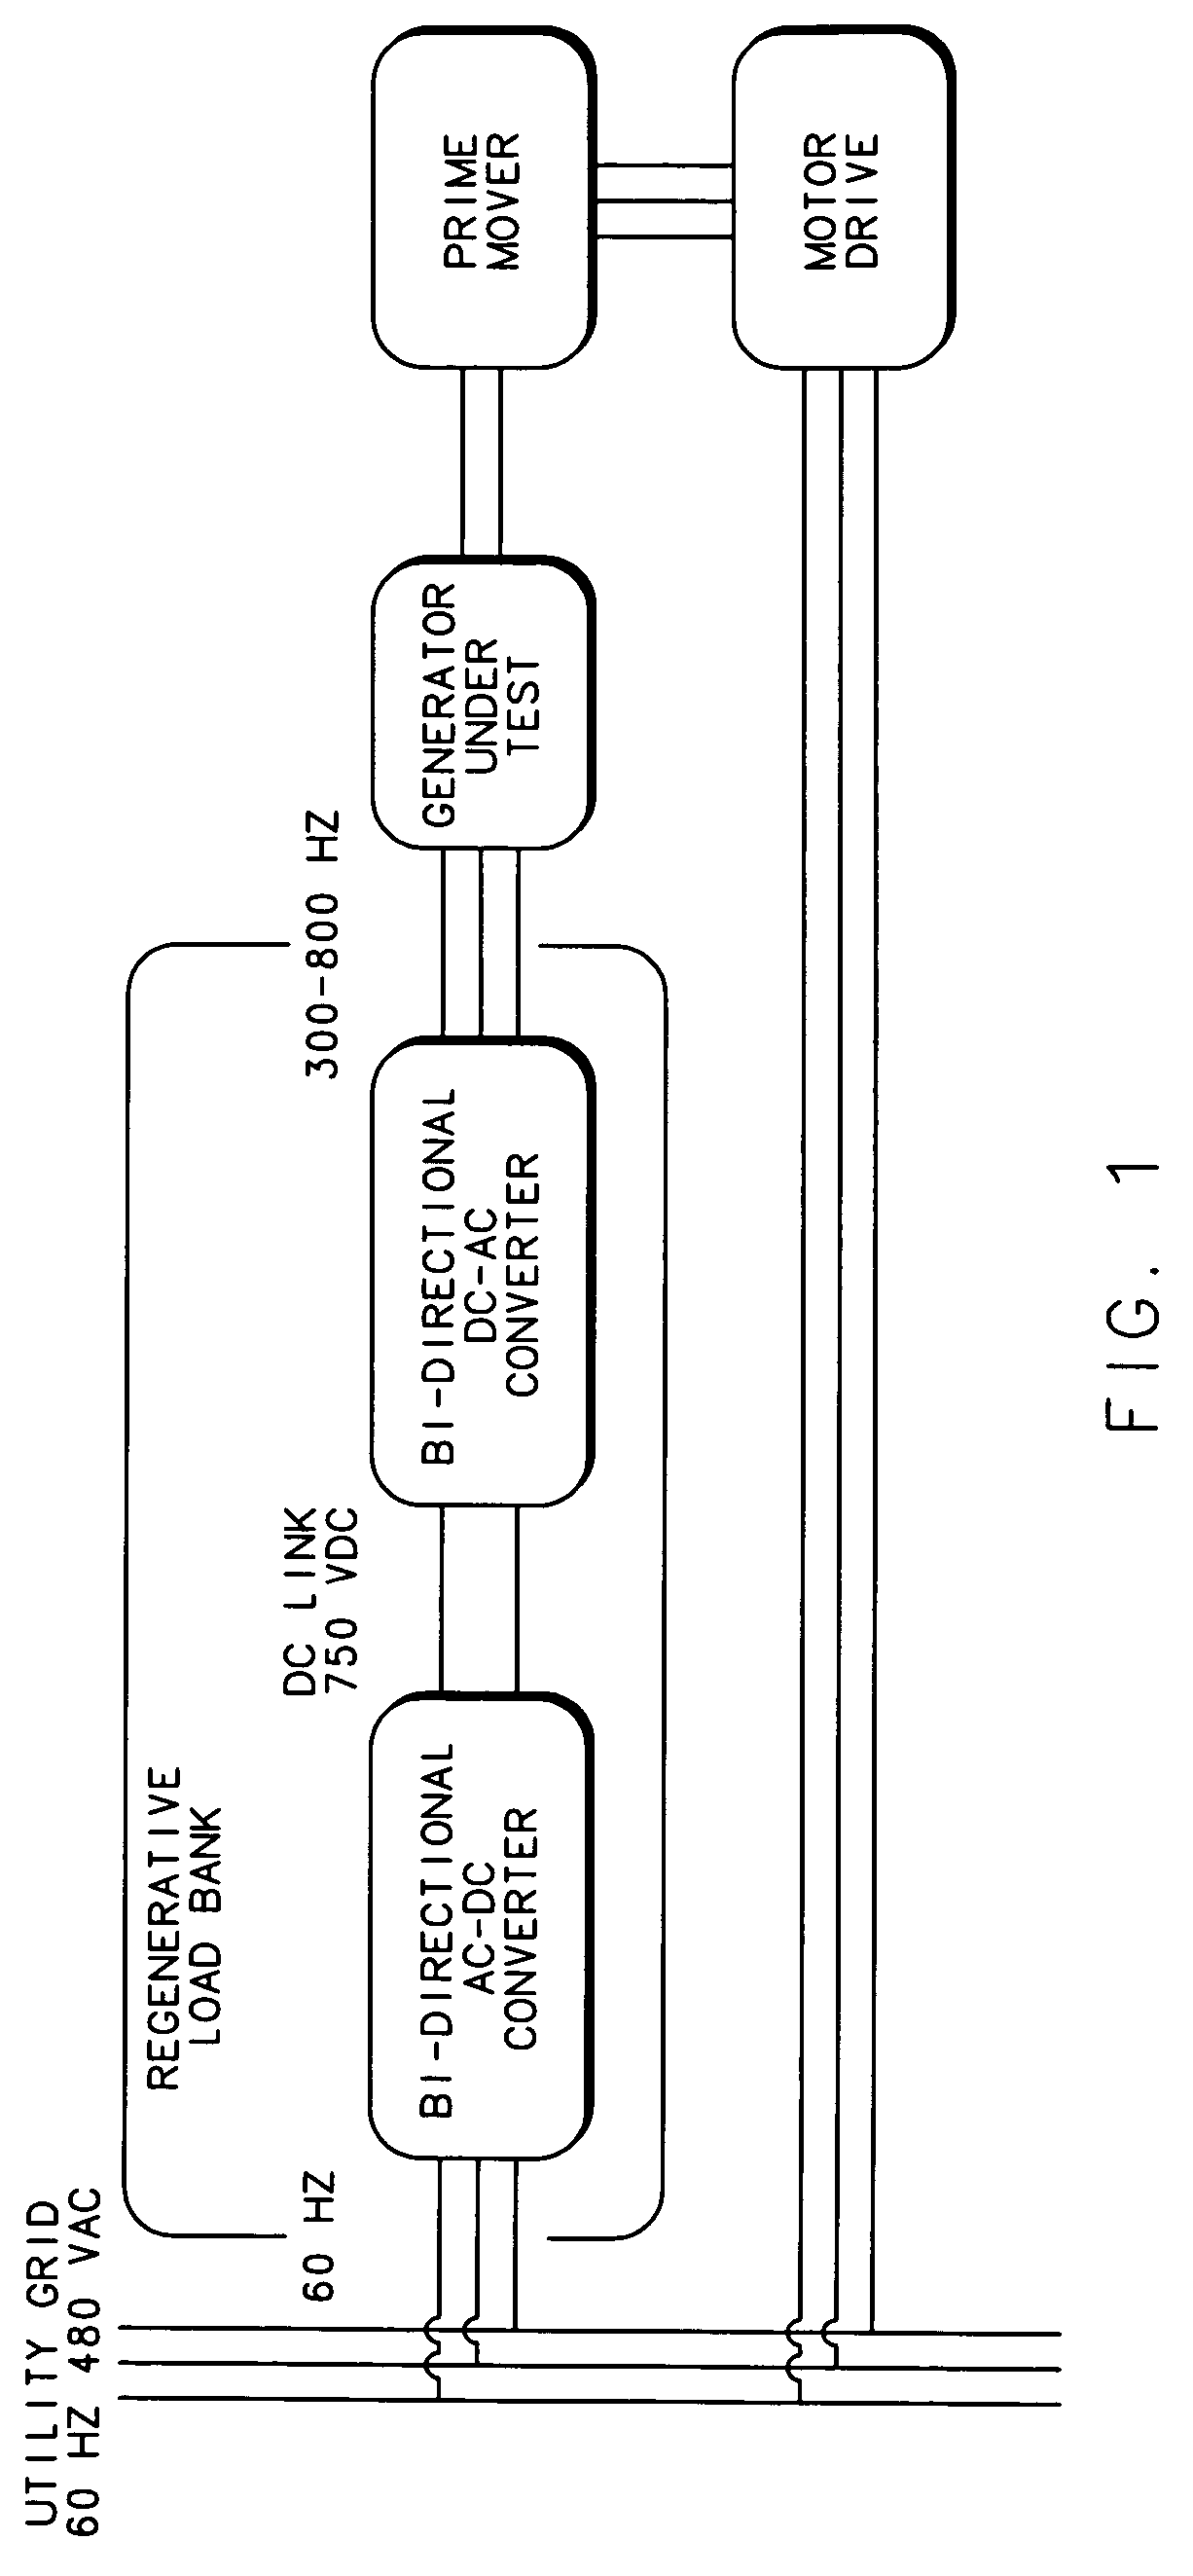 Regenerative load bank with a motor drive